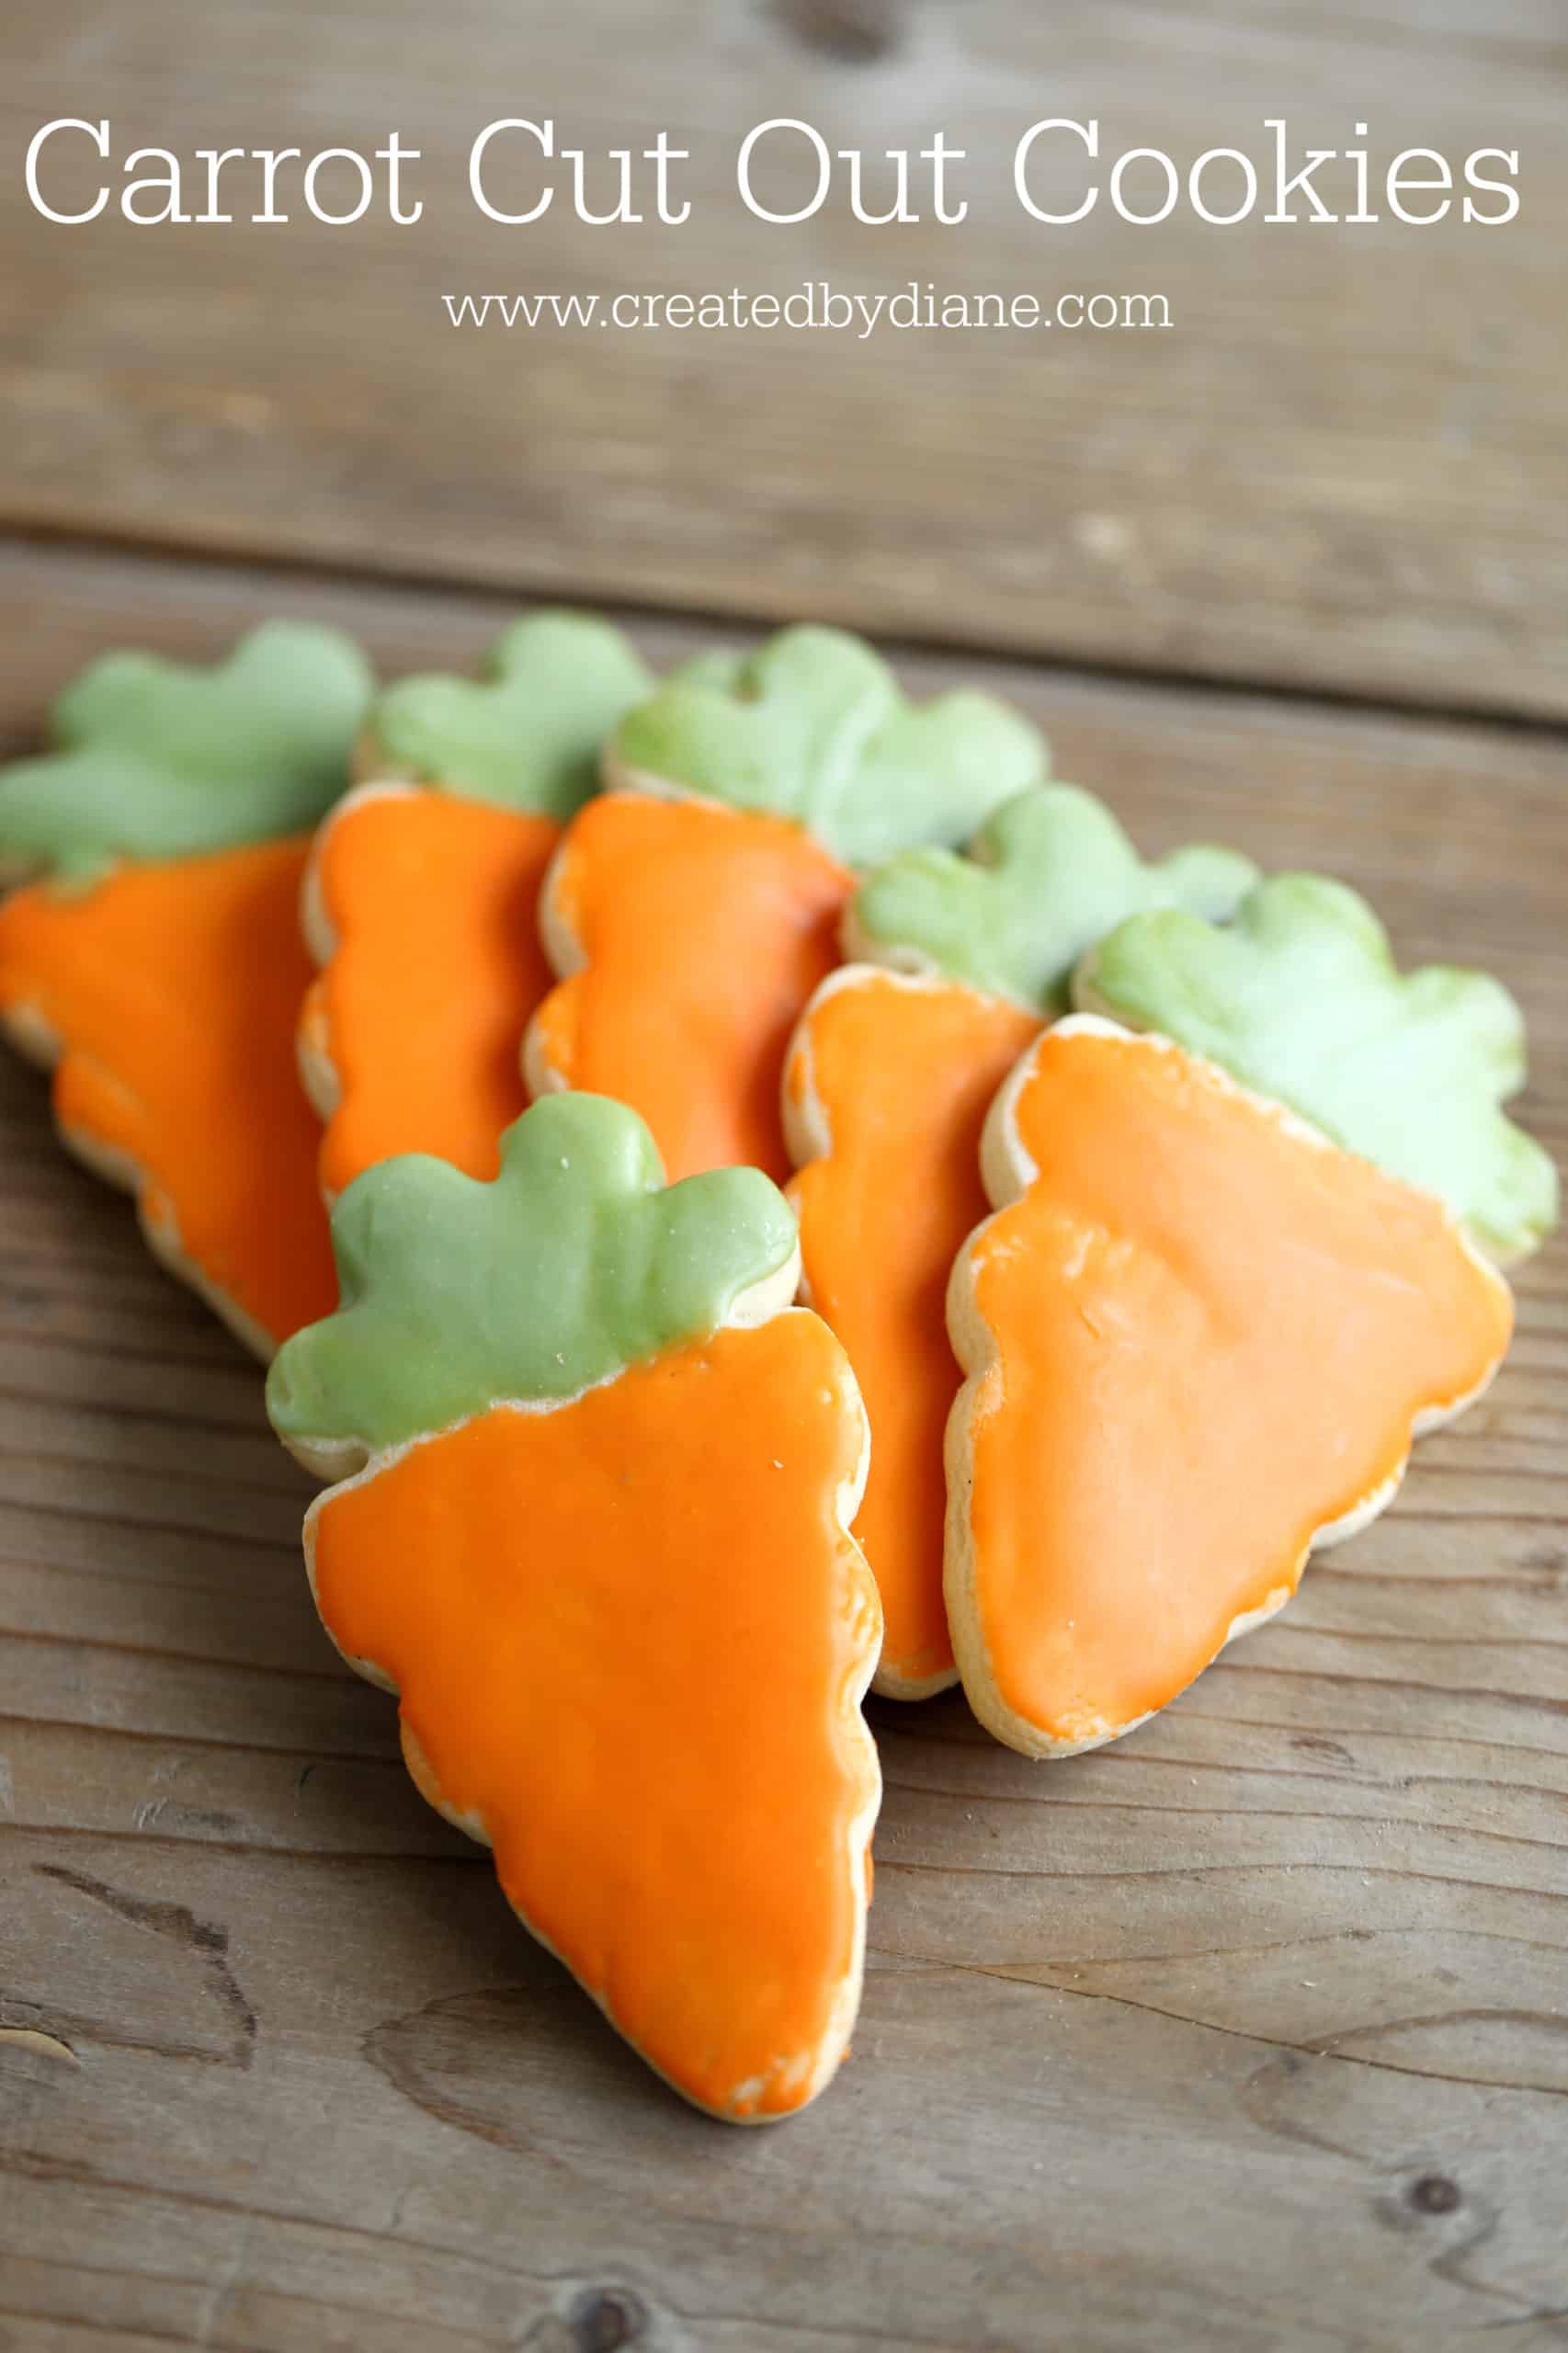 Carrot Cut Out Cookies